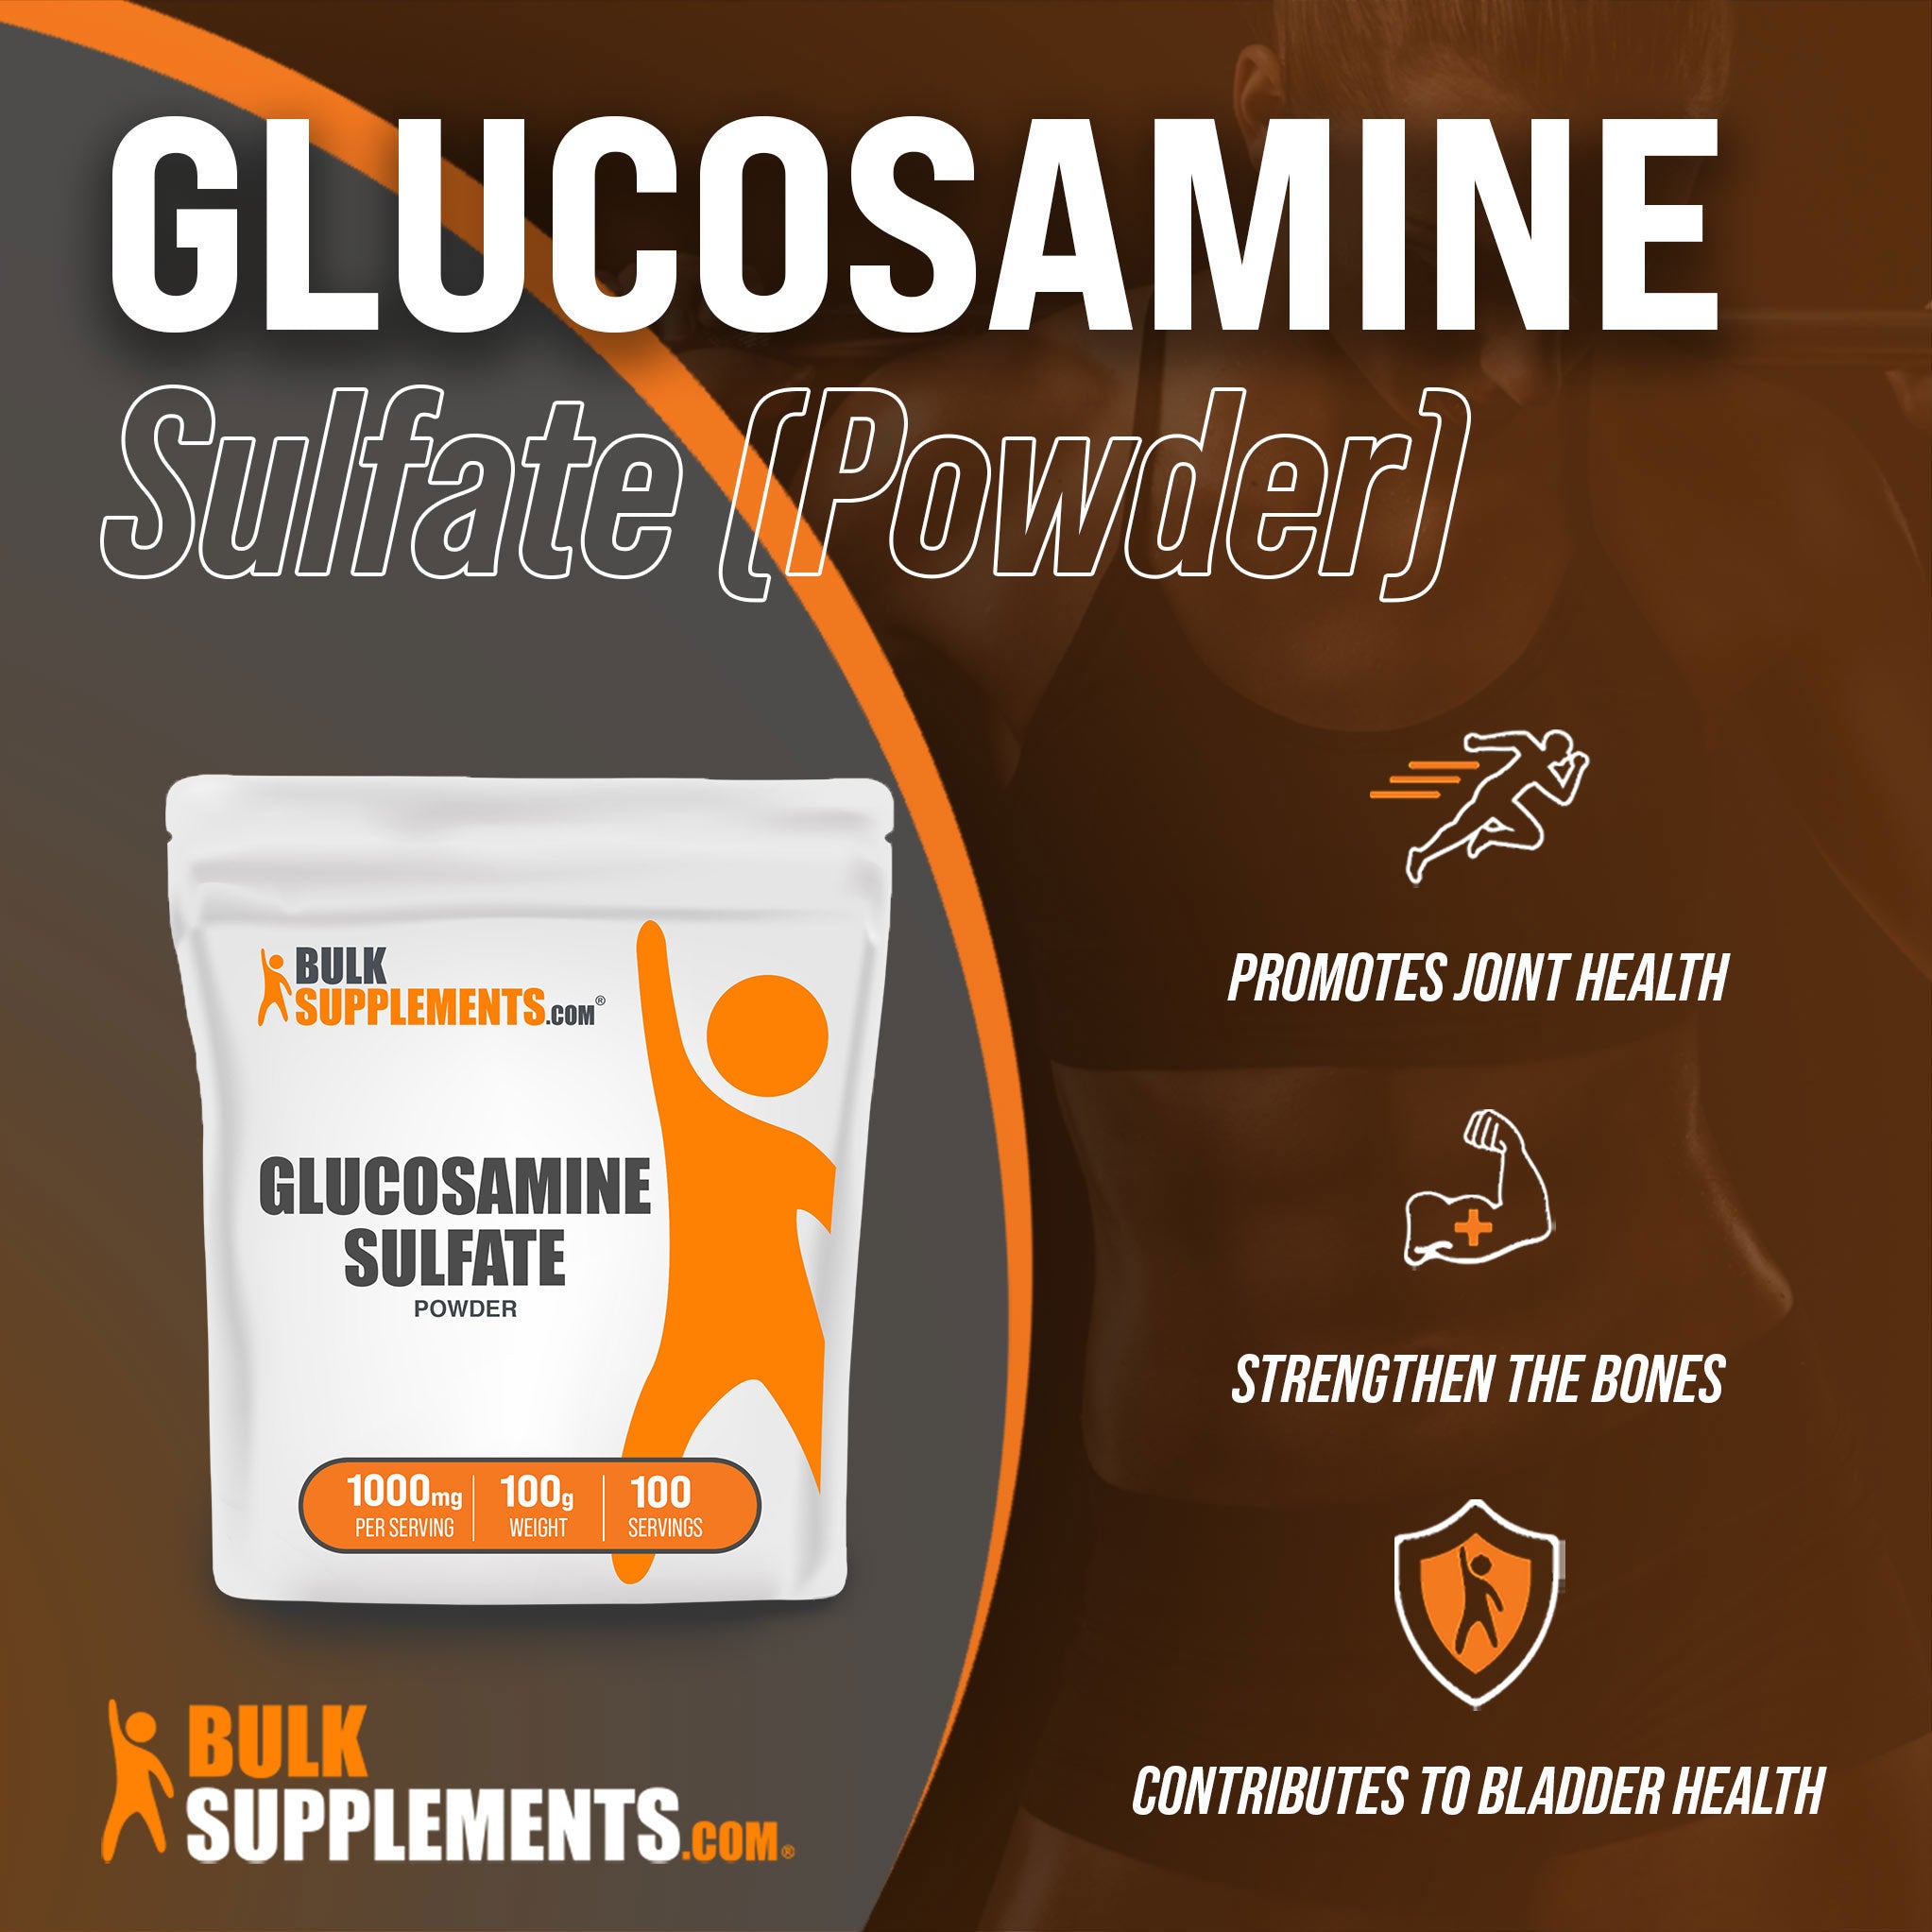 Benefits of Glucosamine Sulfate; promotes joint health, strengthen the bones, contributes to bladder health